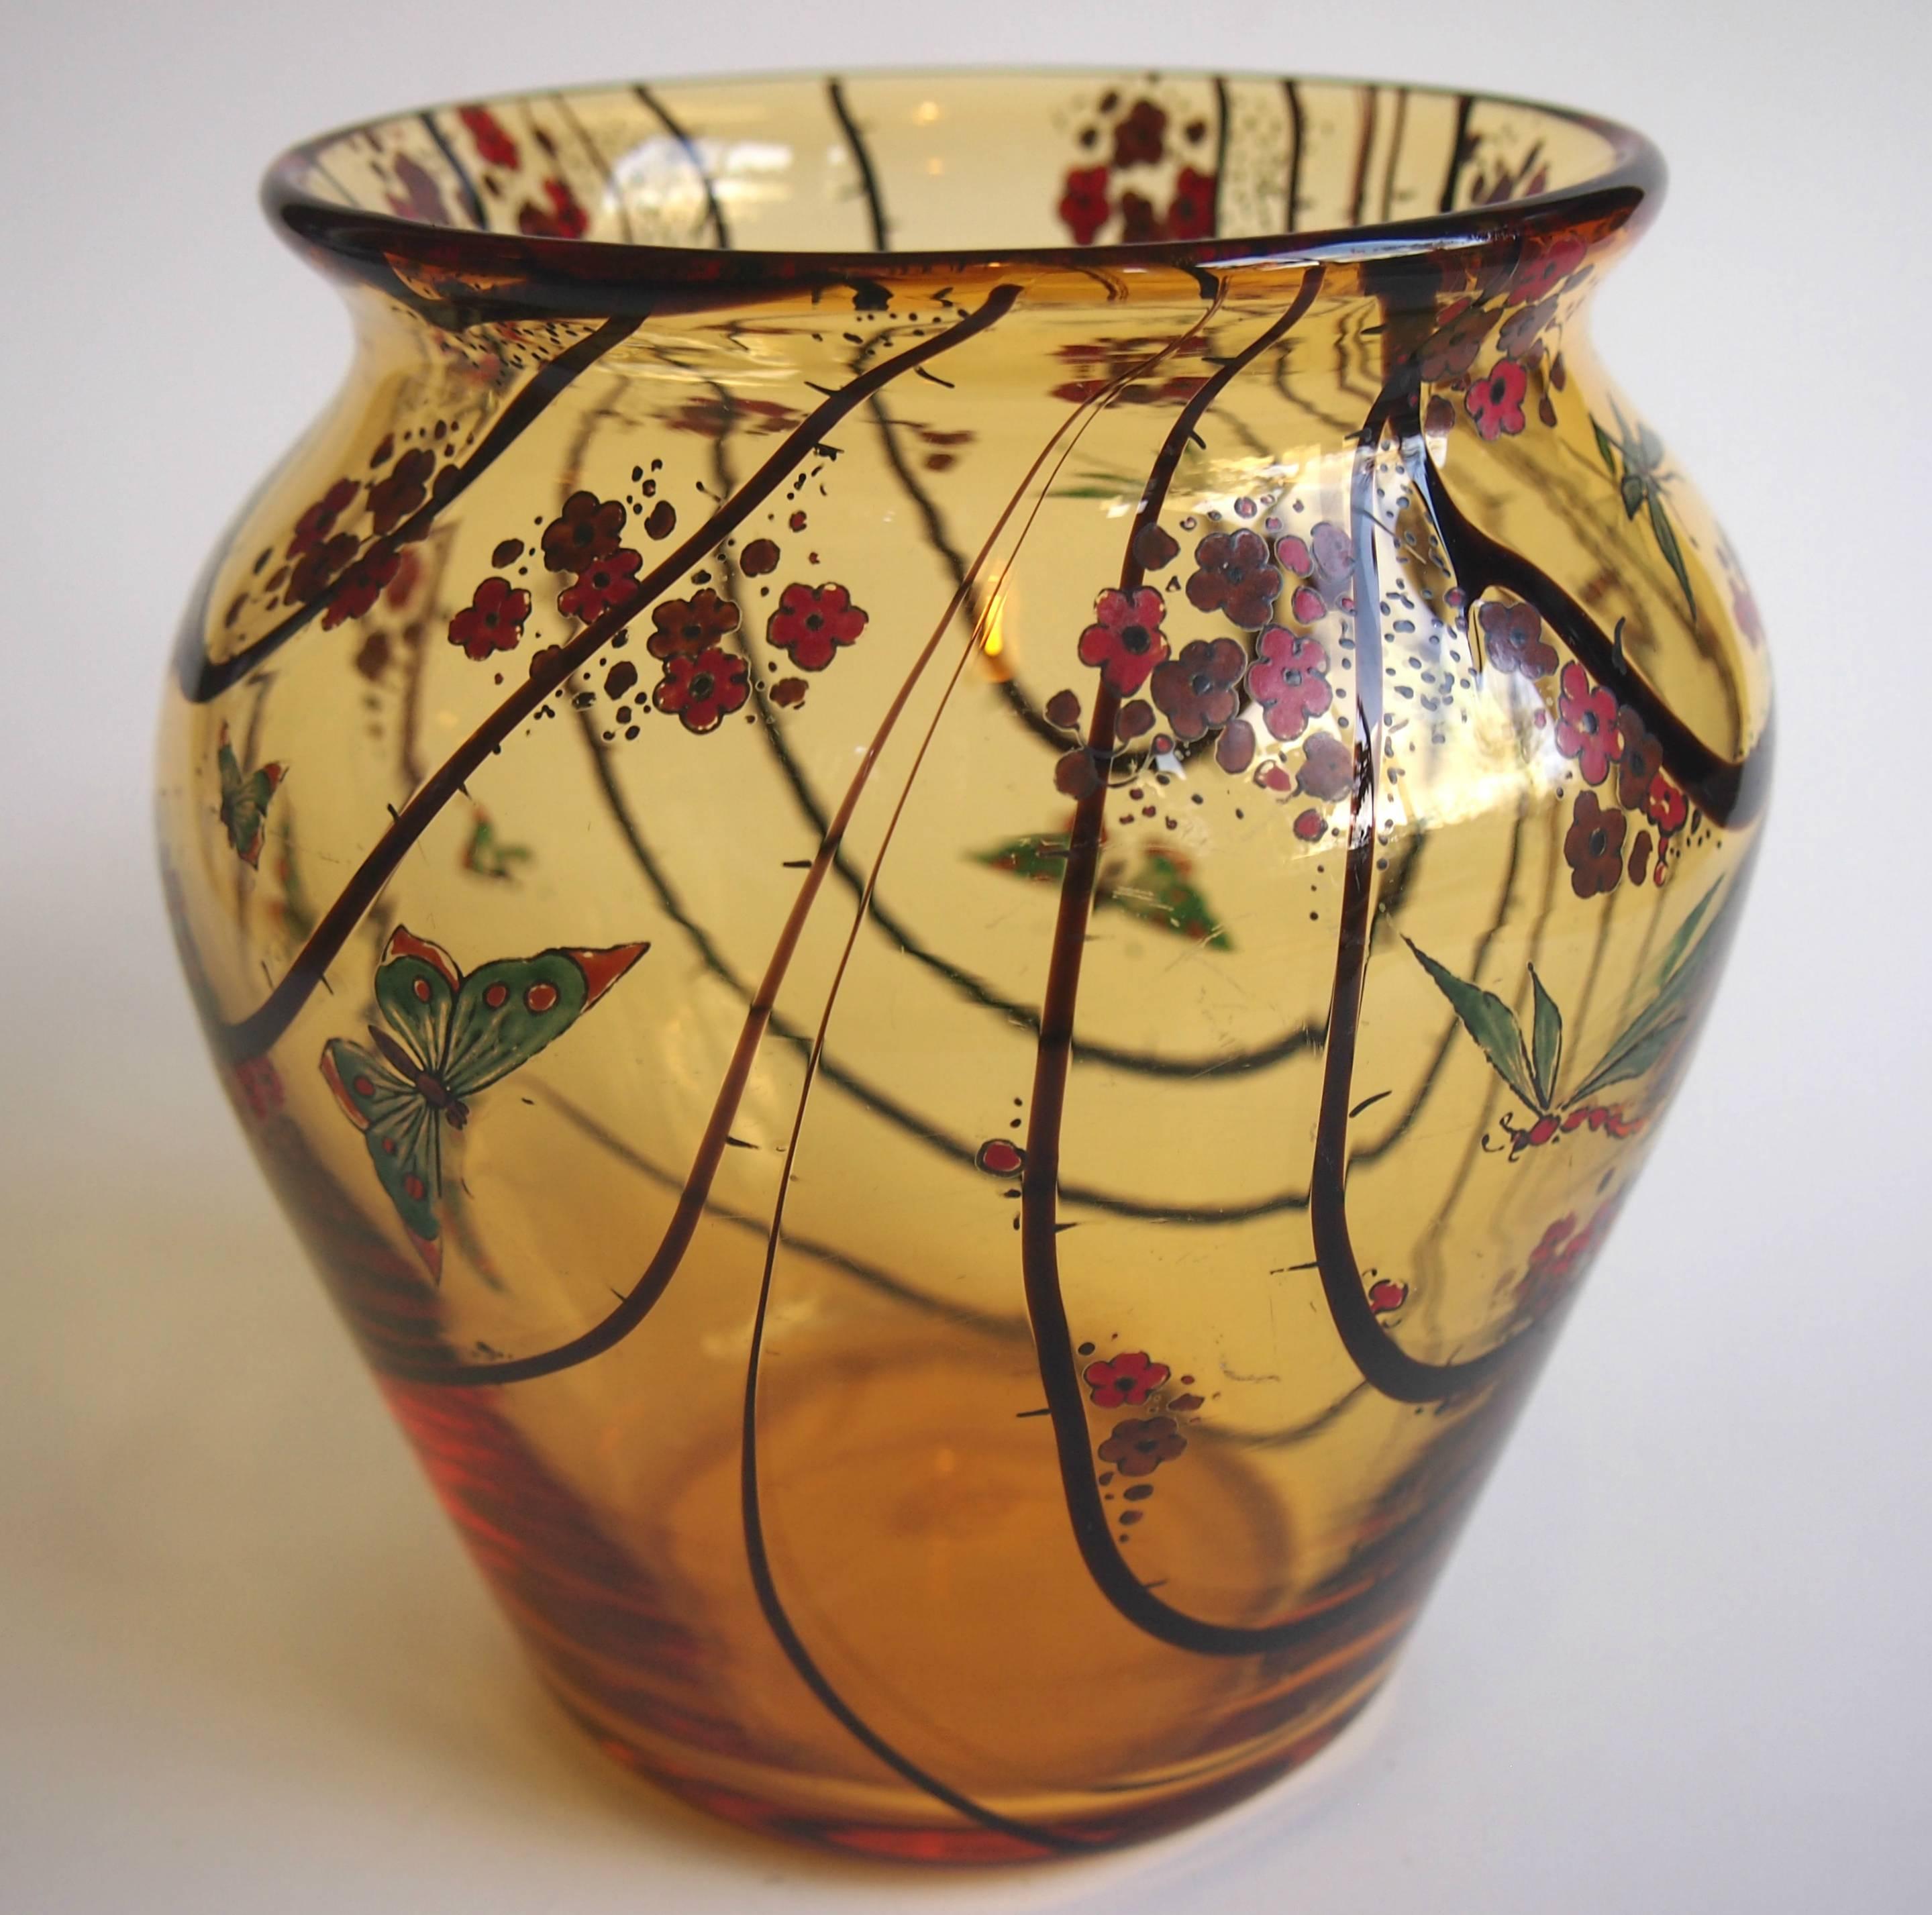 A stunning amber with random brown frond vase decorated with polychrome enamelling featuring blossoms and a variety of insects; Butterflies, Dragonflies and Moths. Stuart Crystal briefly made a series on enamelled pieces in the Art Deco style from